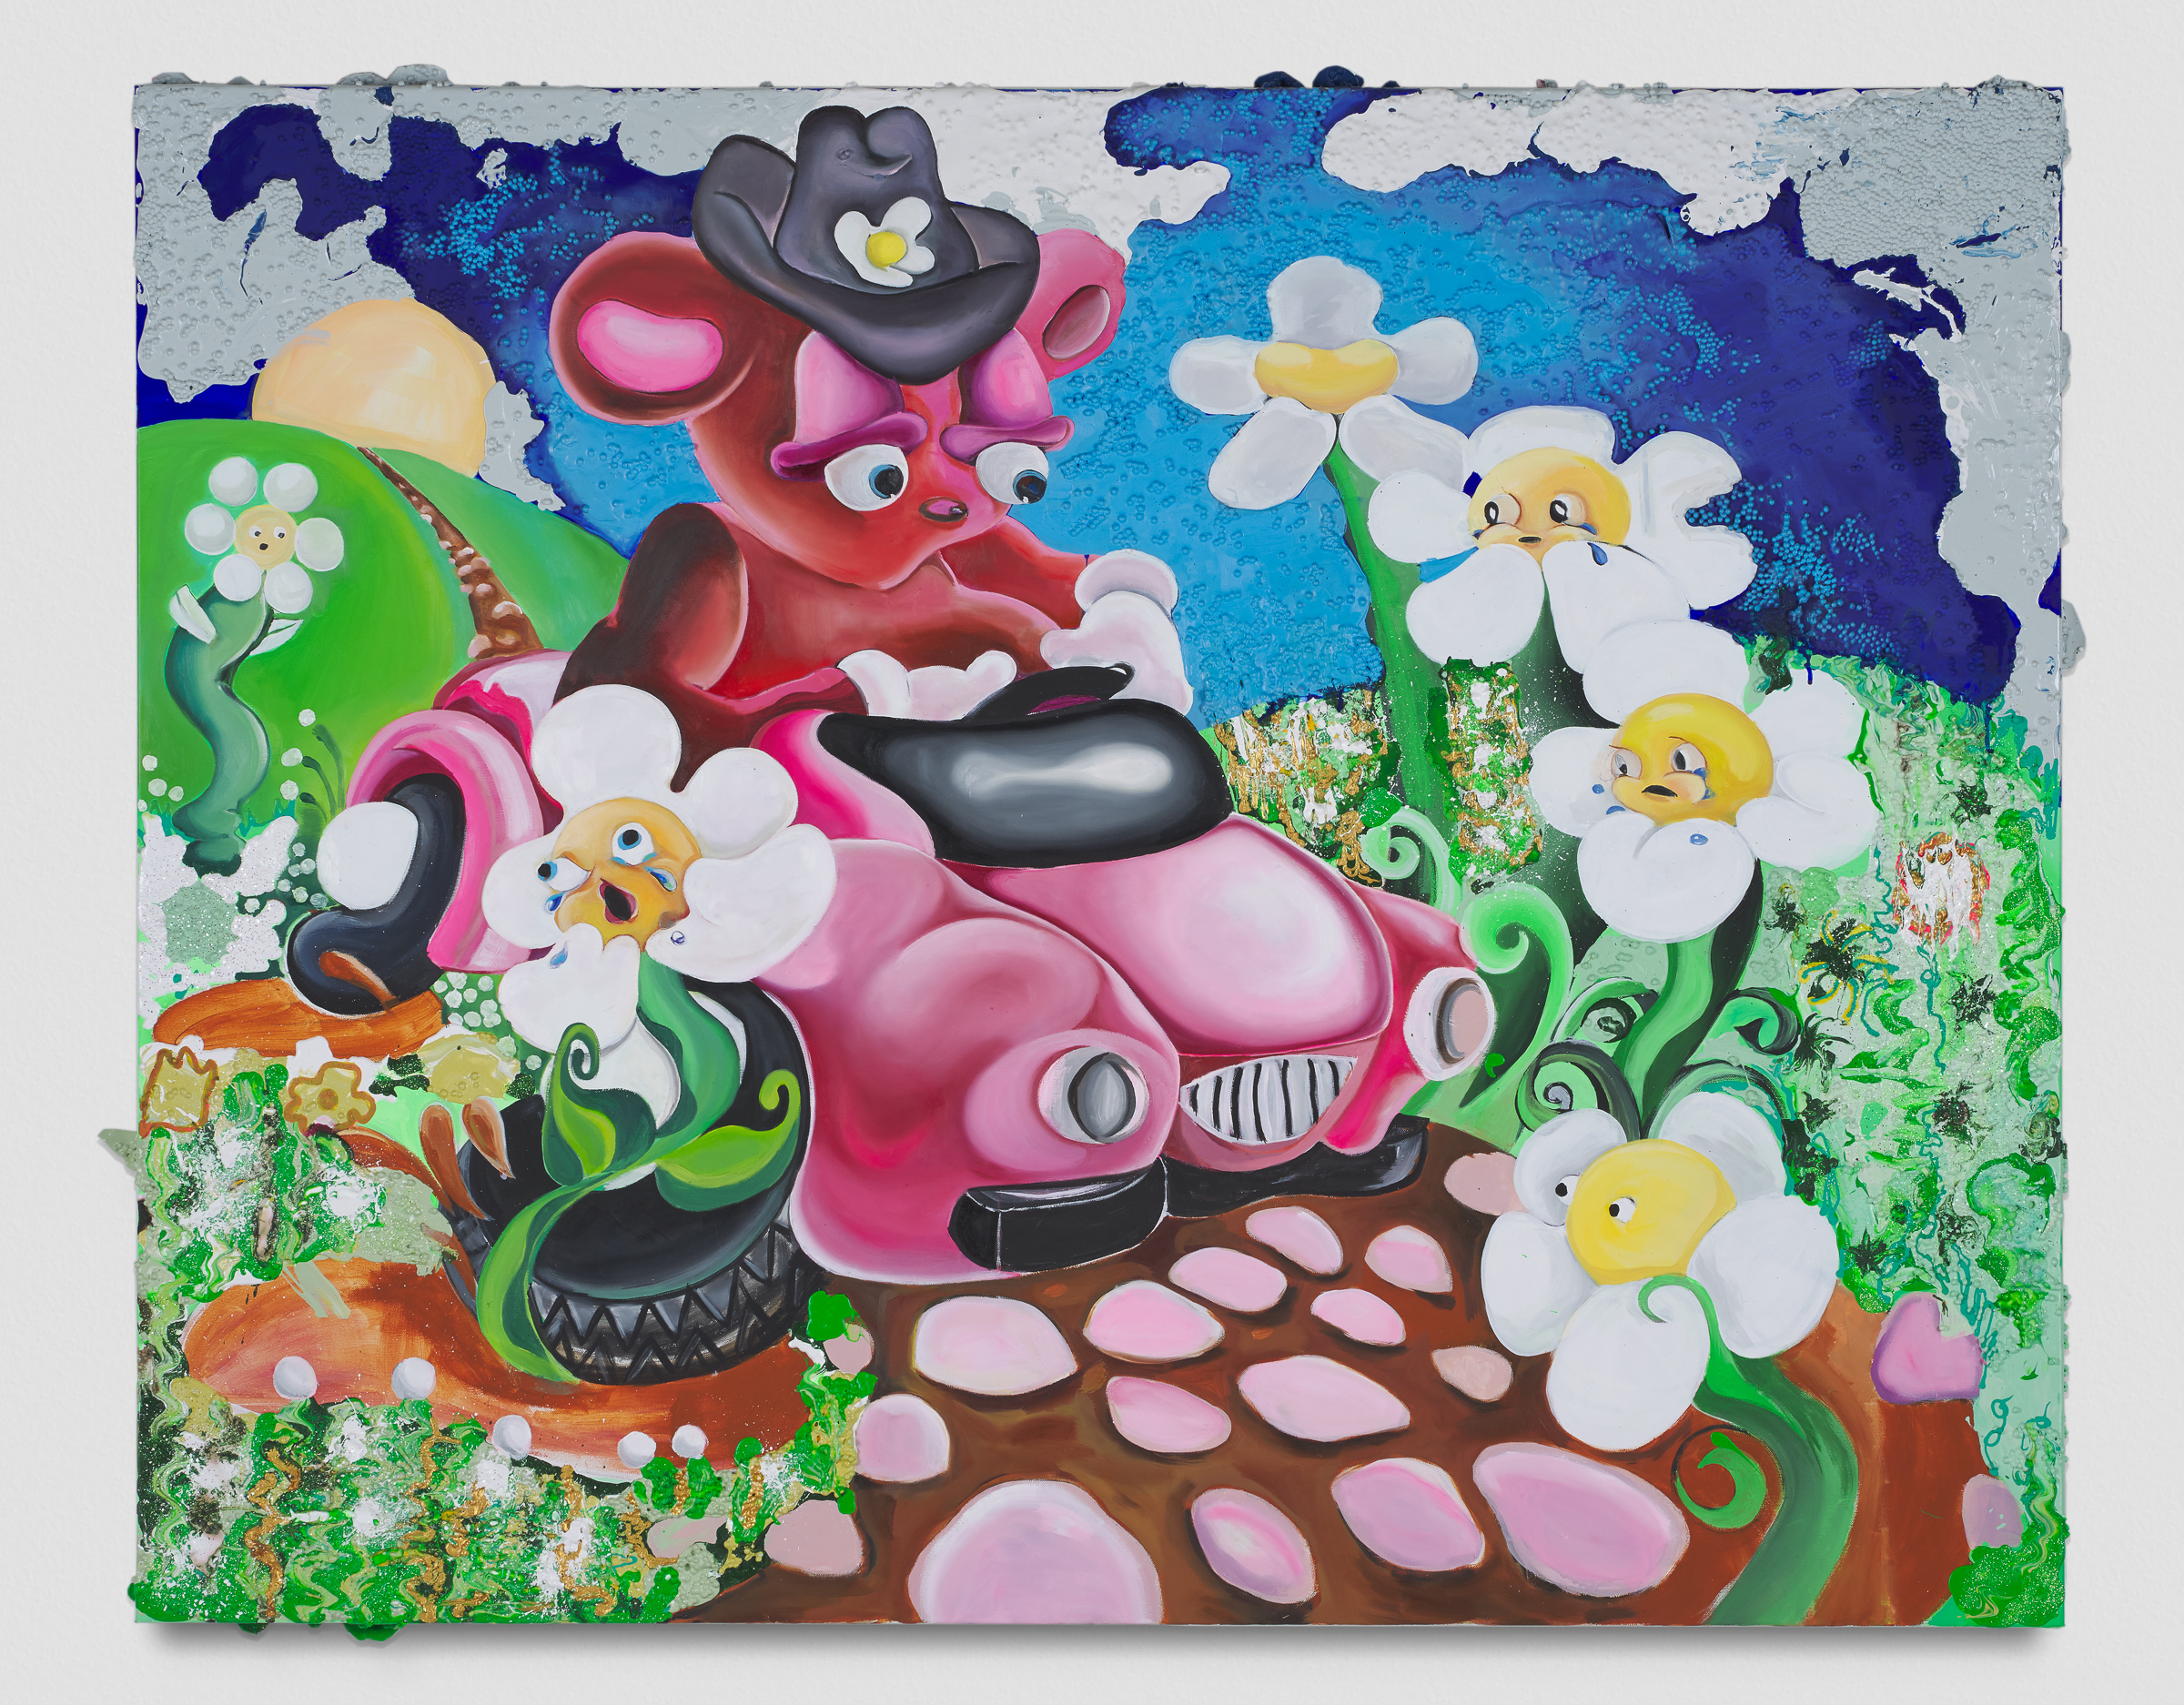   Alake Shilling   Buggy Bear is Out Of Control On The Long and Winding Road,  2019 Oil, flashe, acrylic, styrofoam, glitter 50 x 60 inches Photo by Elon Schoenholz 